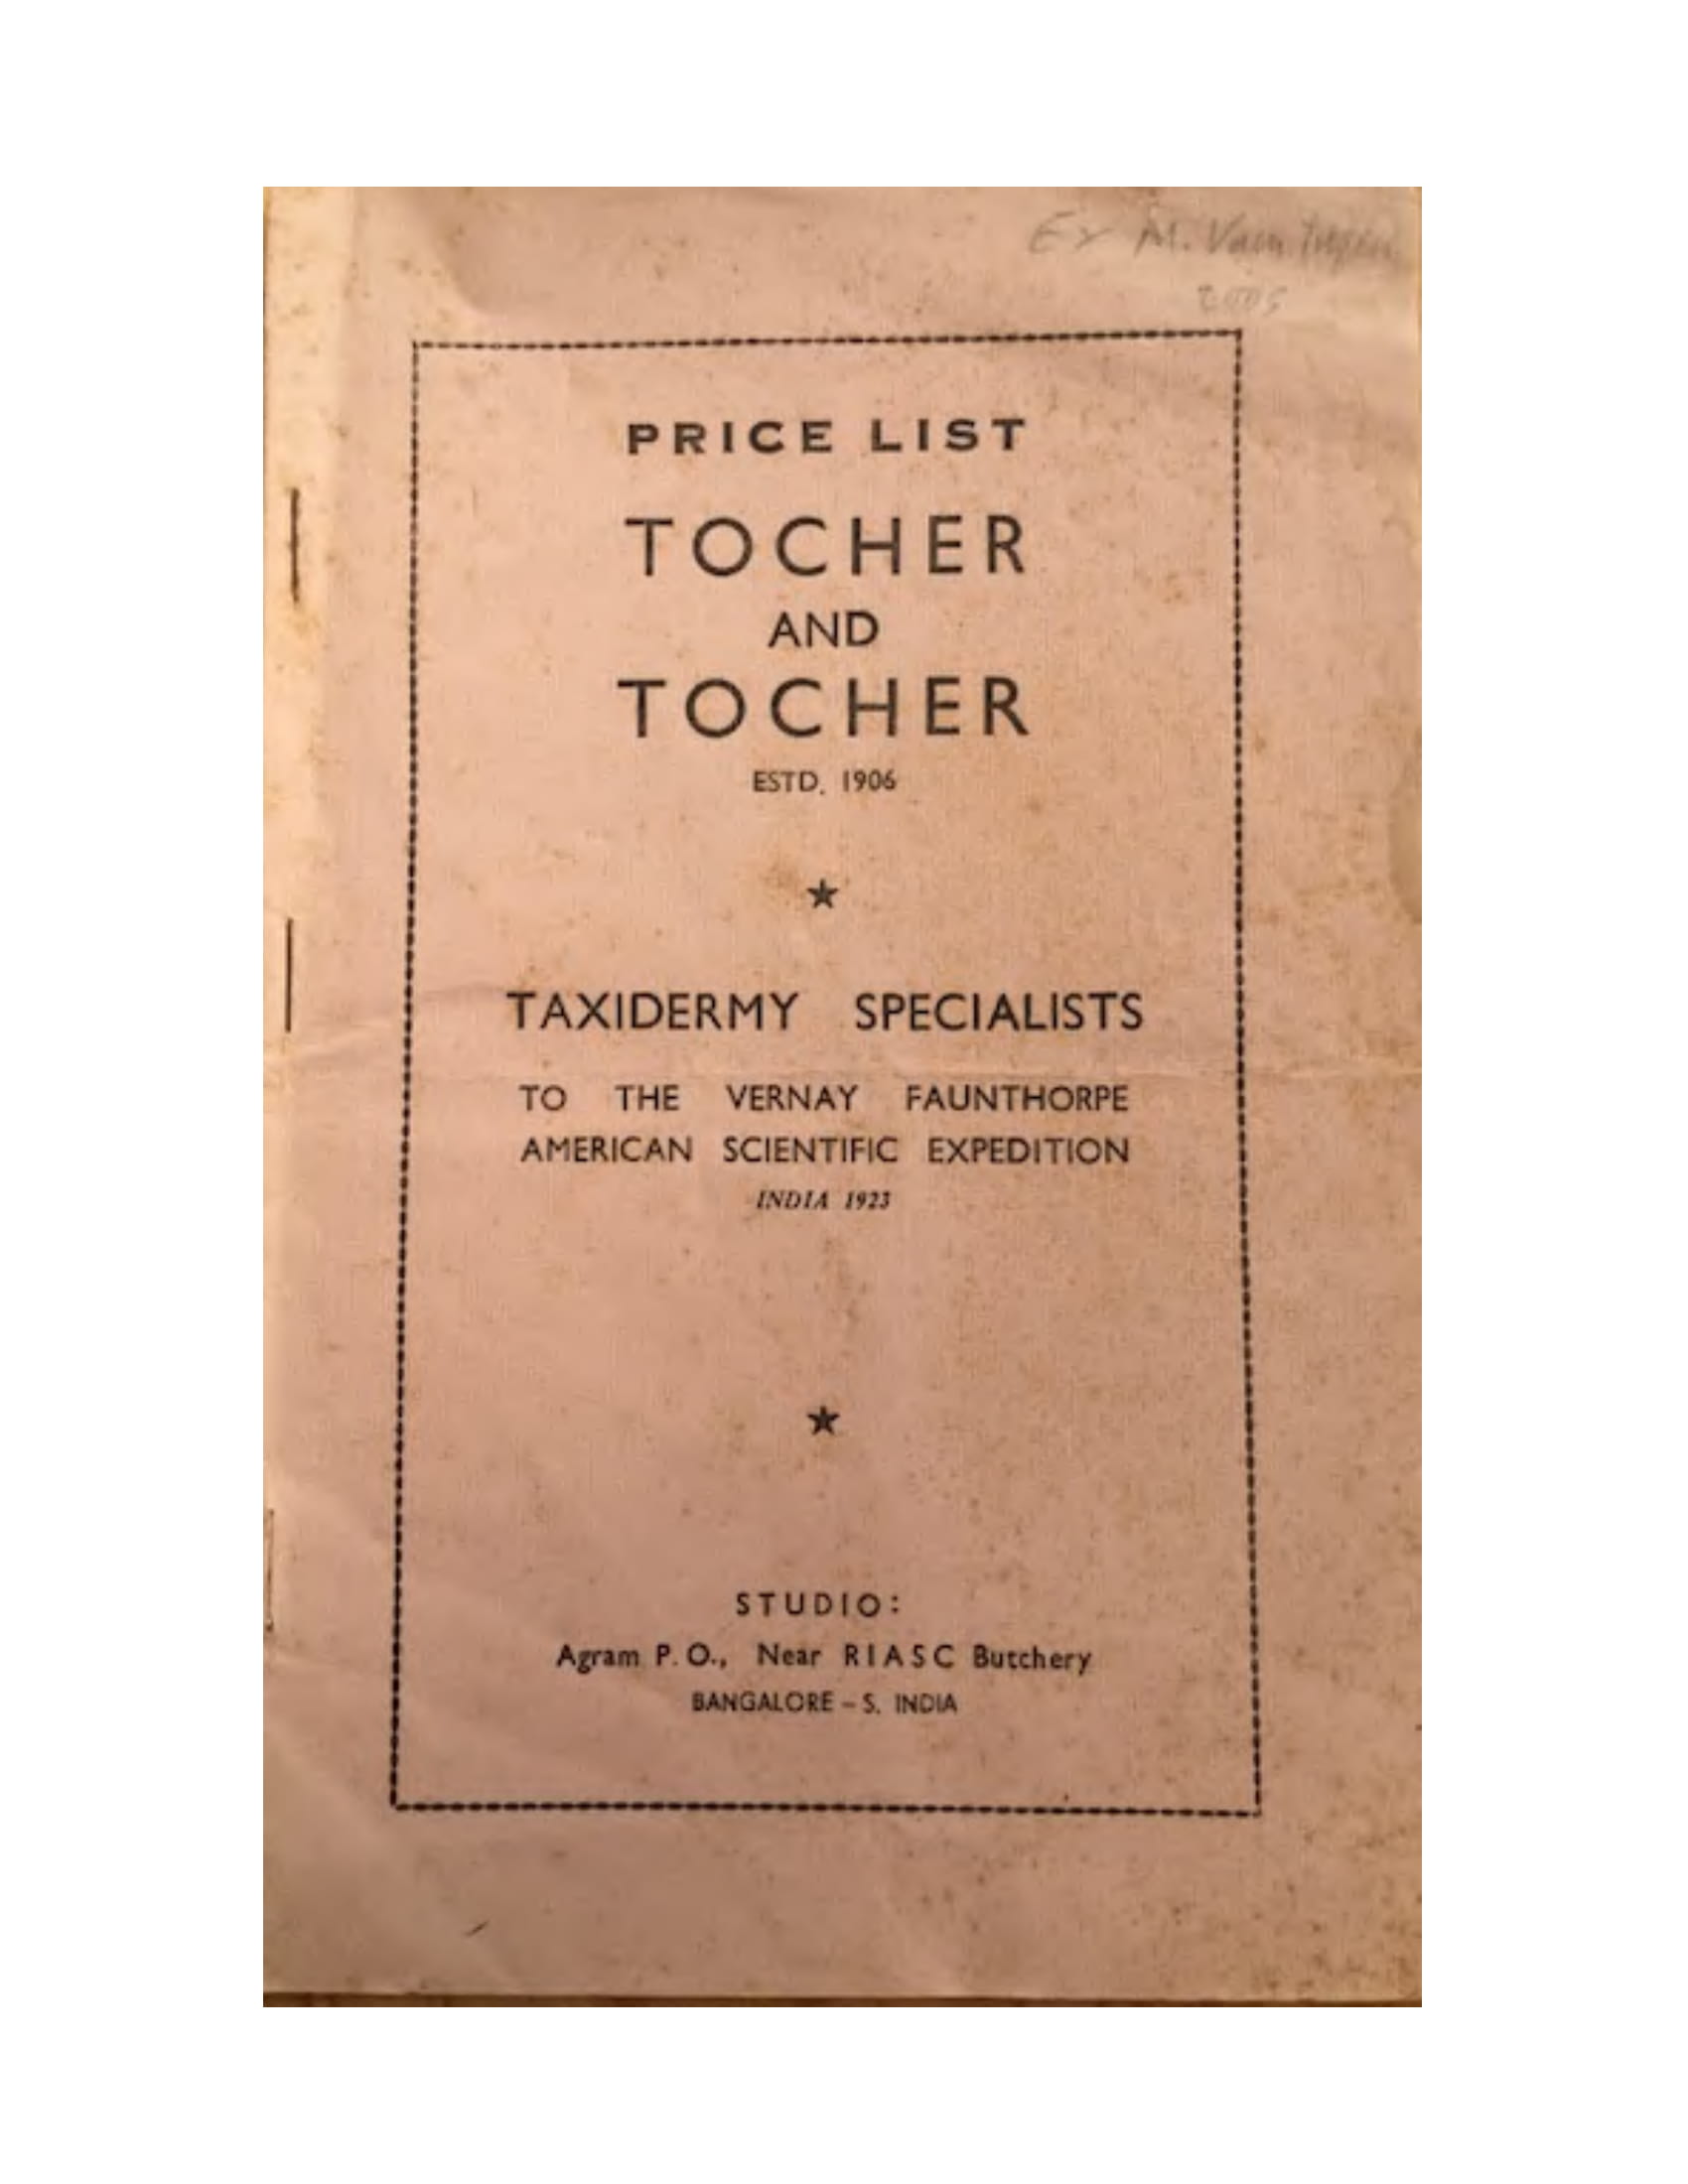 Tocher-And-Tocher-Price-List-01.jpg